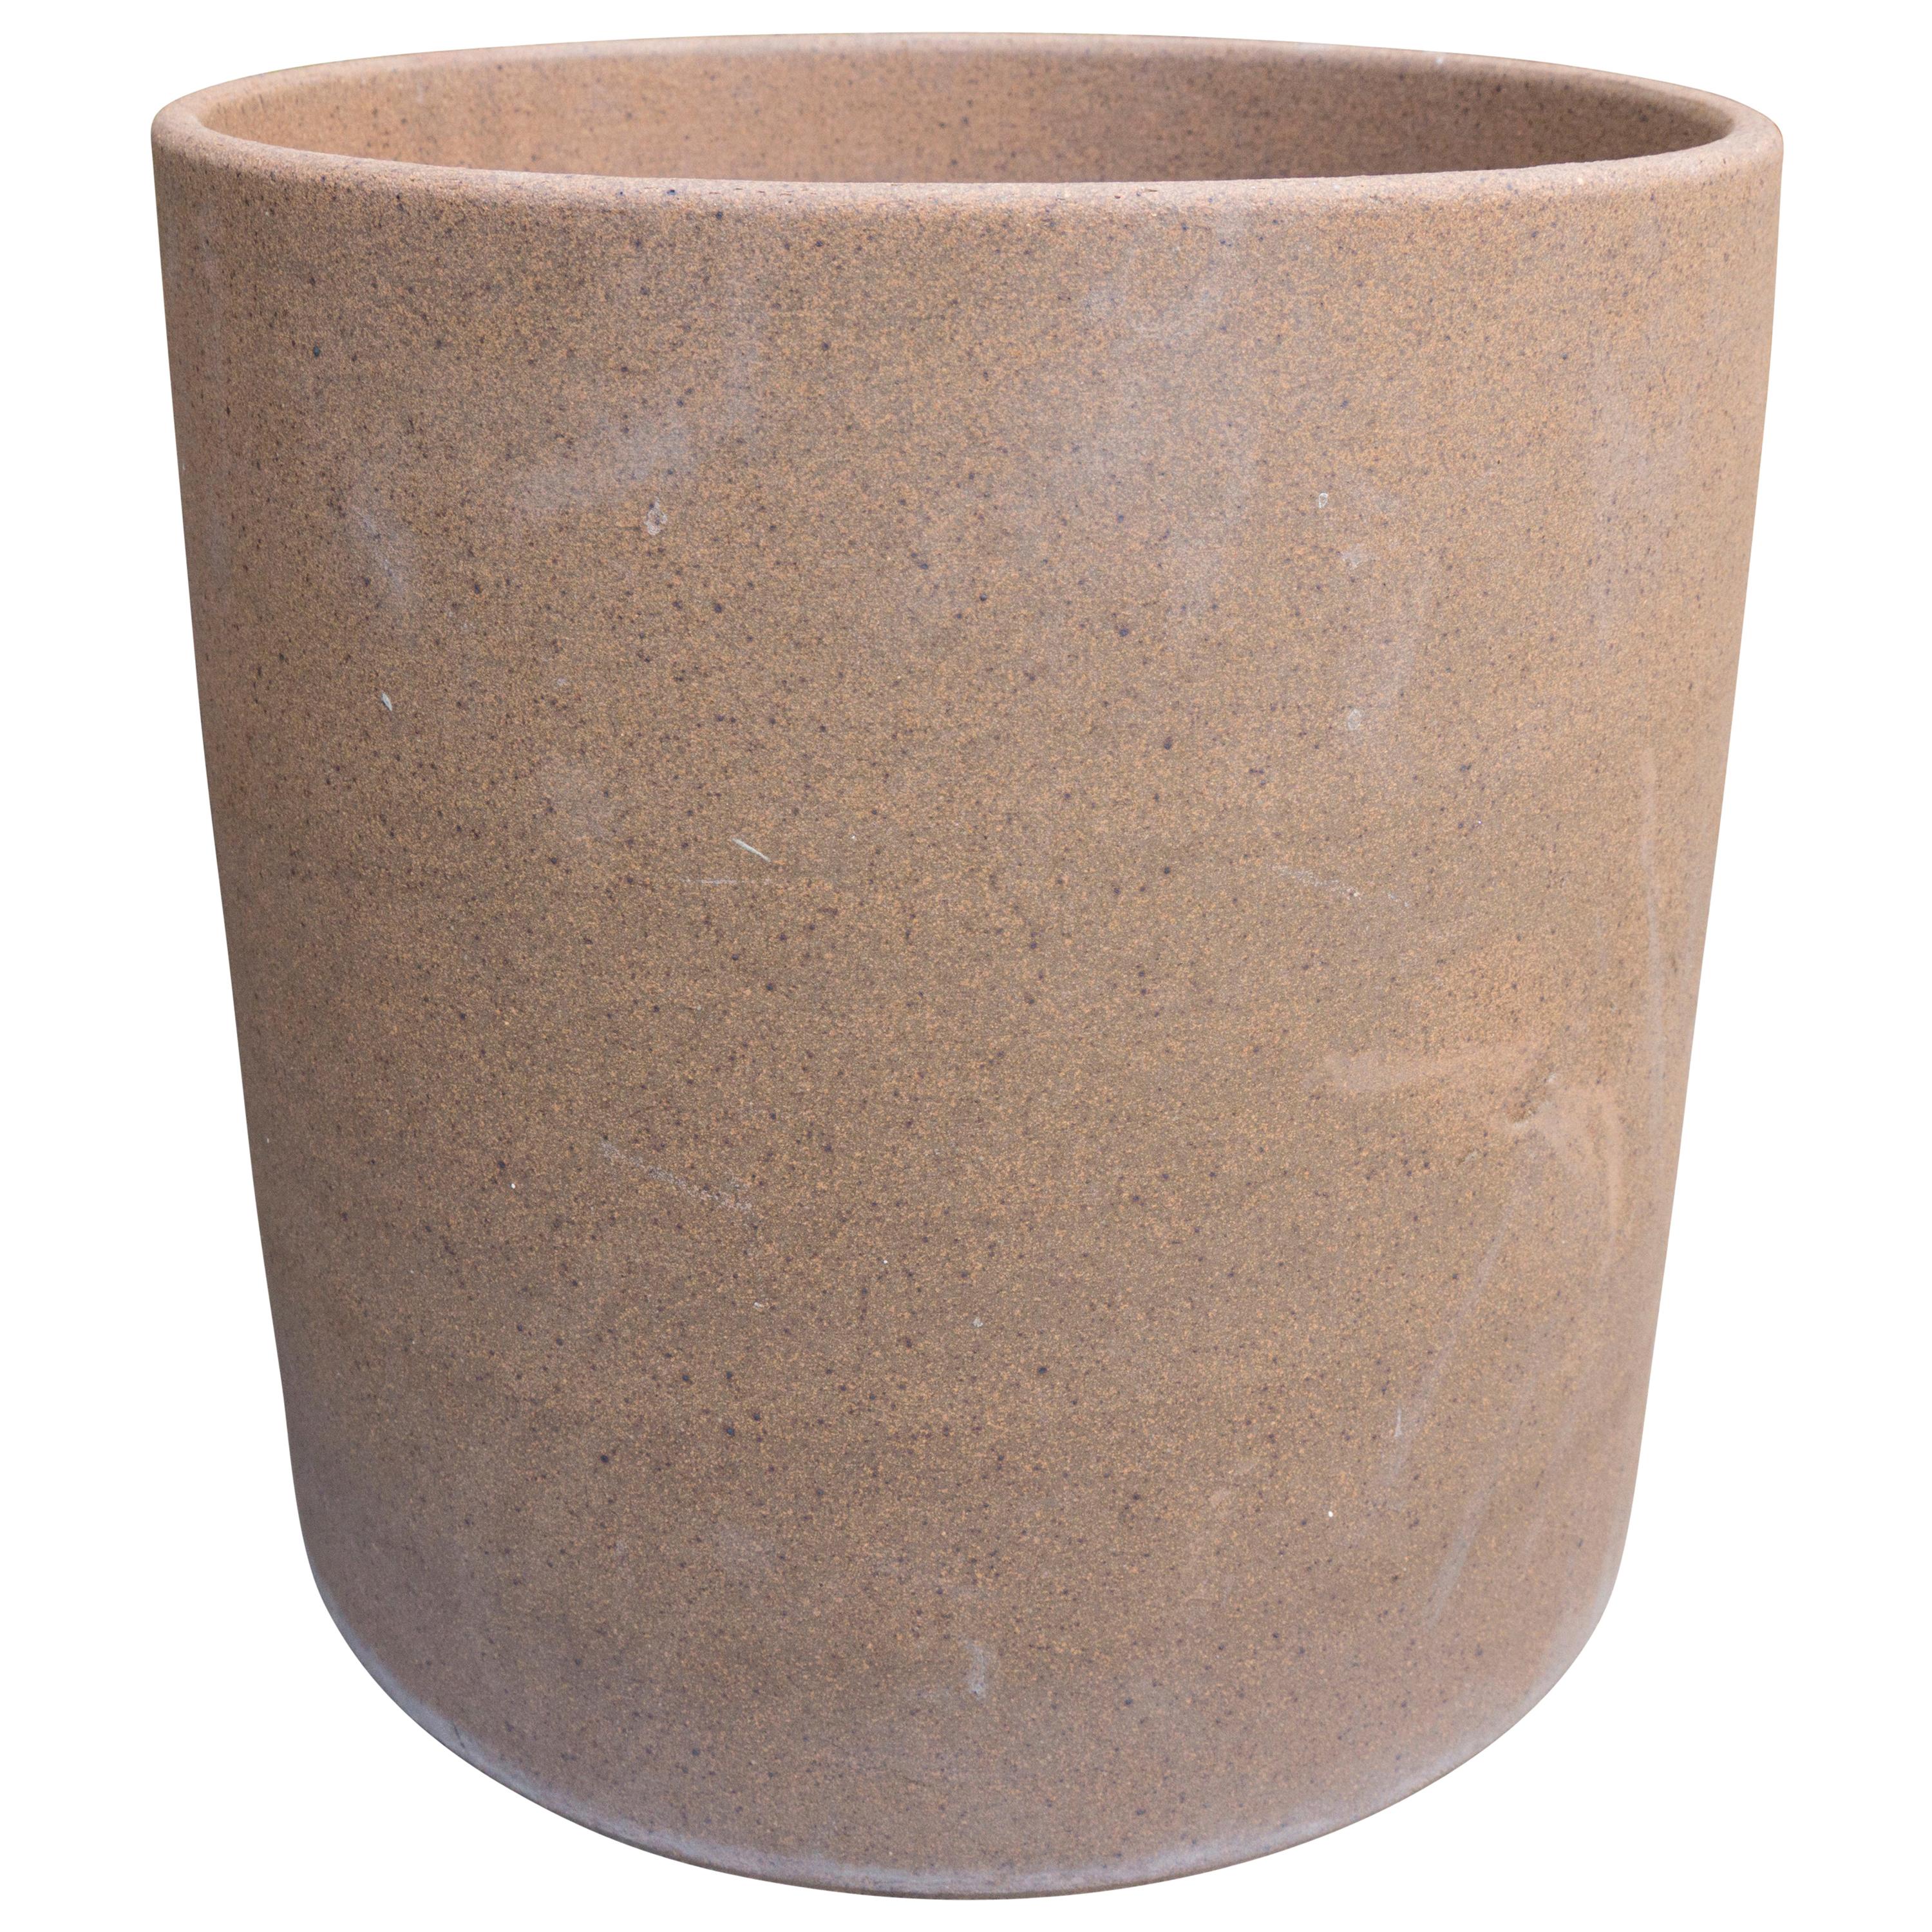 David Cressey Stoneware Cylinder for Earthgender, circa 1970 For Sale